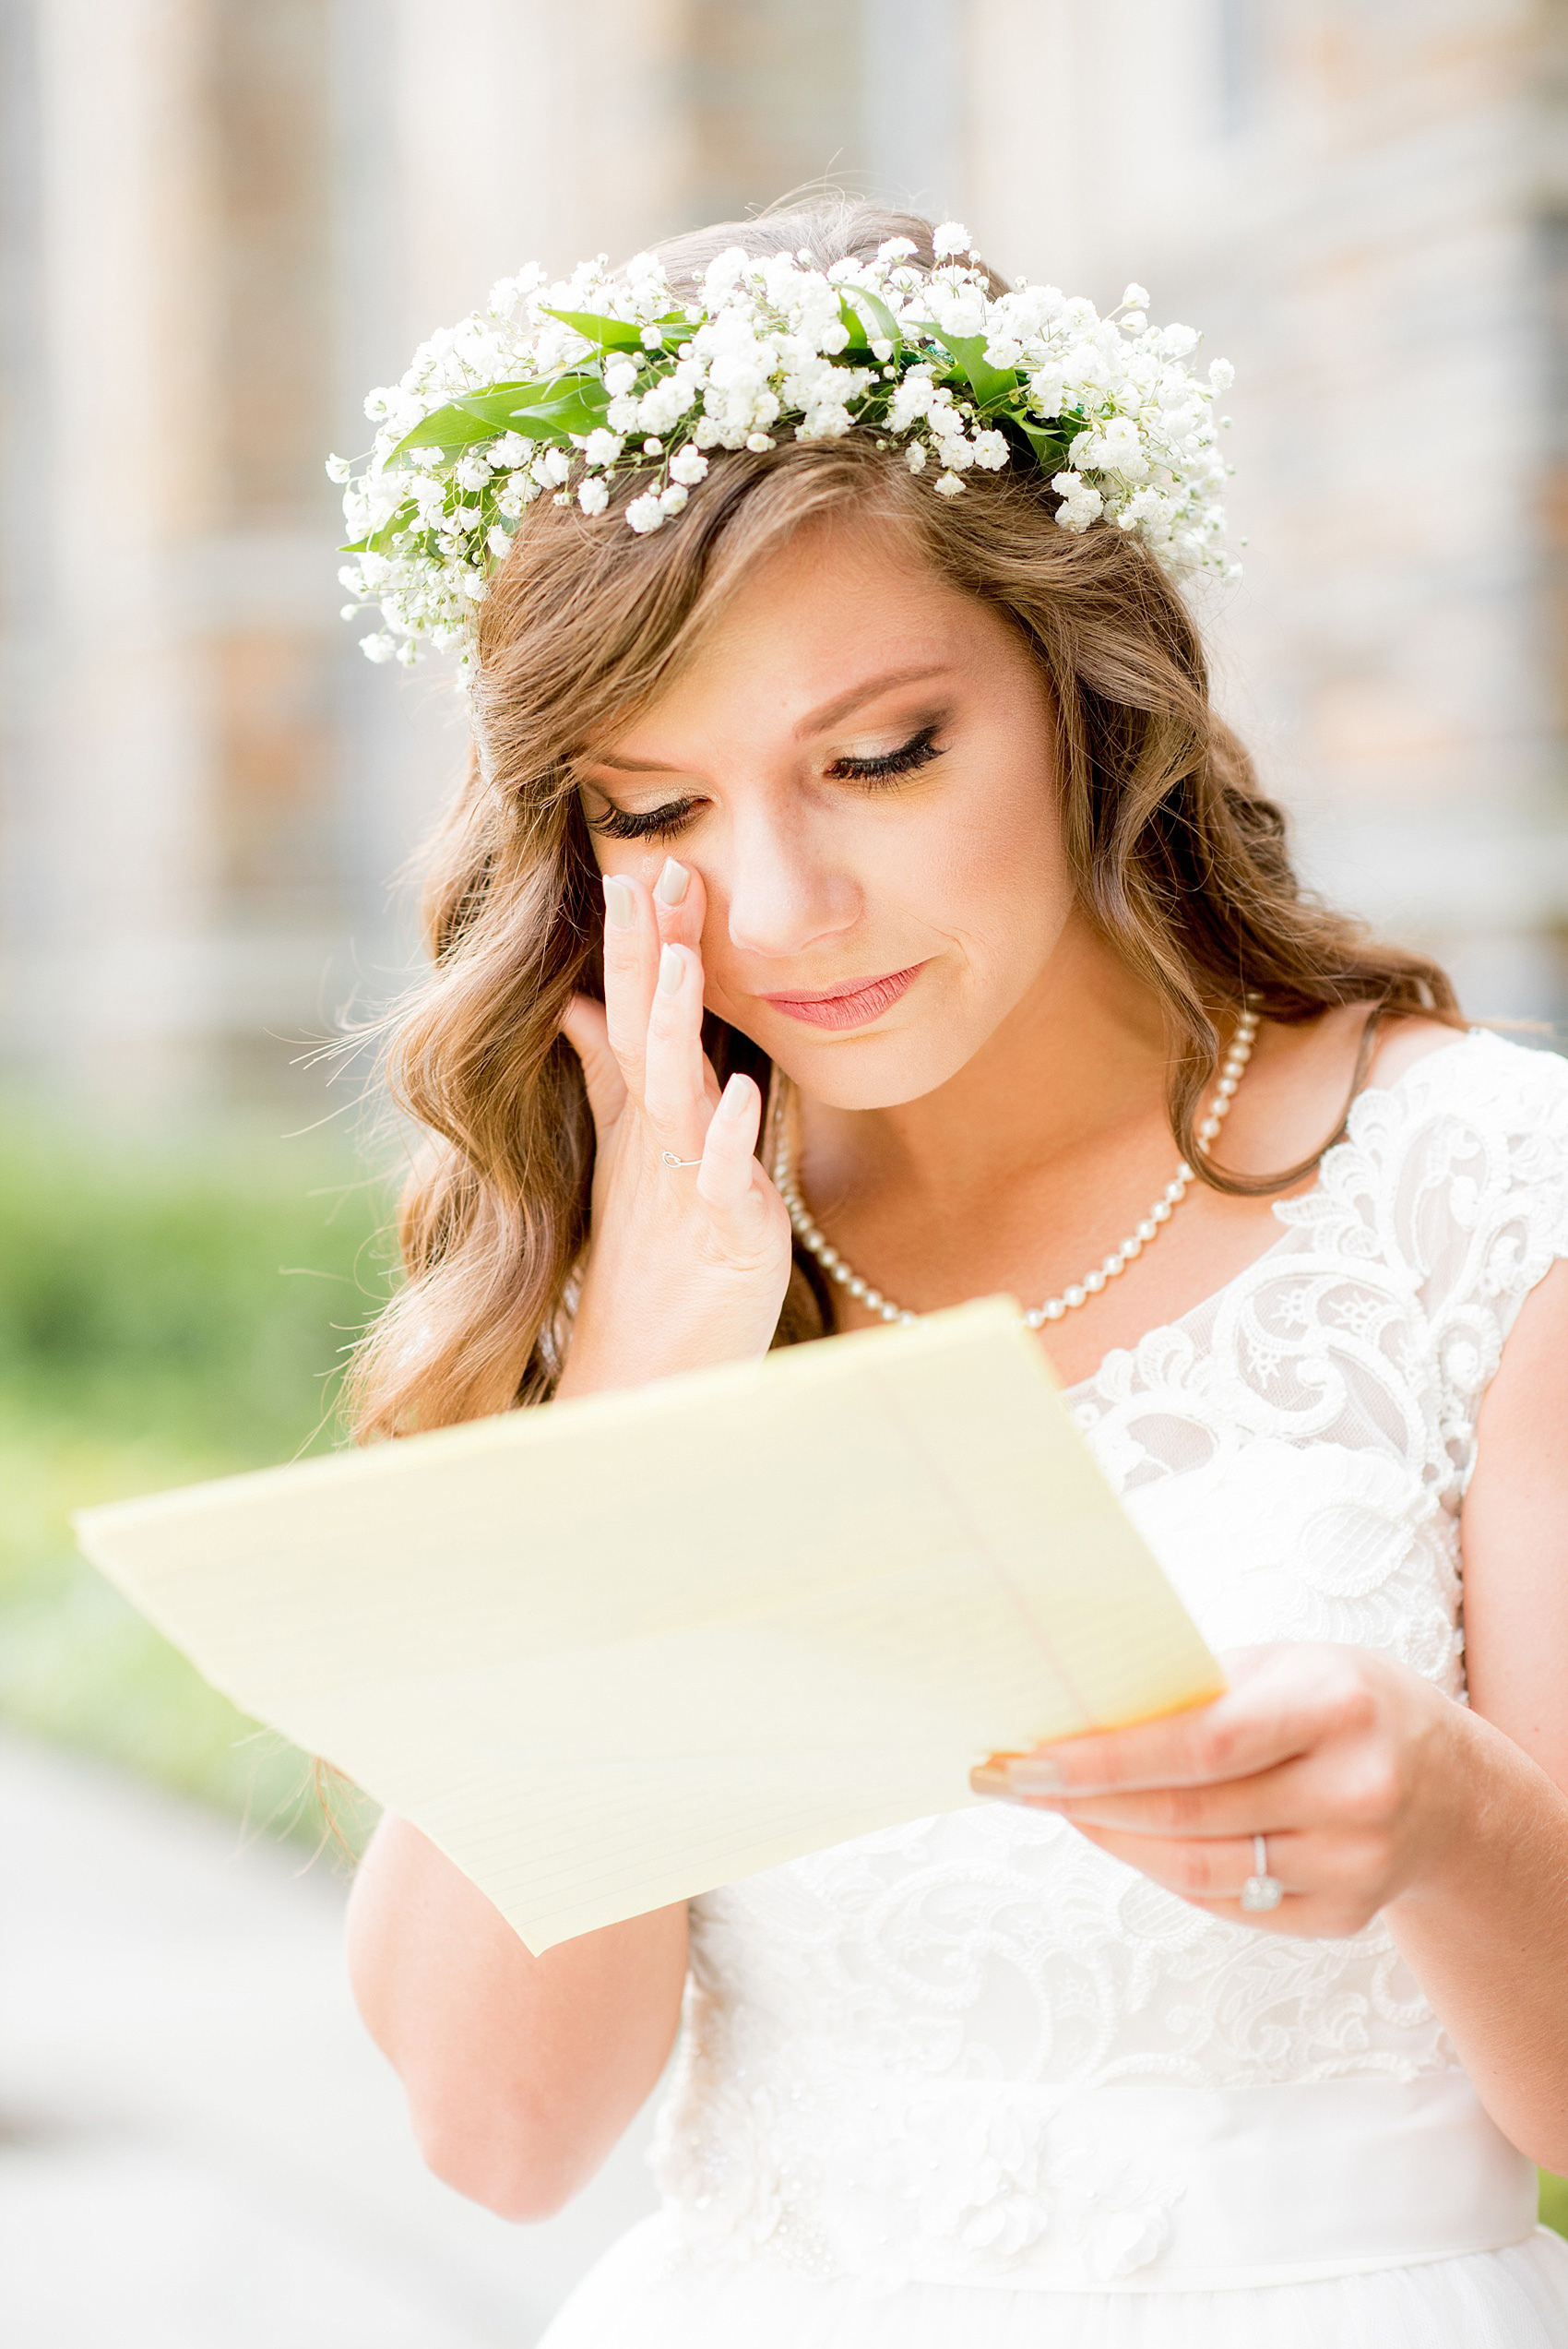 Mikkel Paige Photography photo of a Duke Chapel wedding in Durham, North Carolina. The bride, in a flower crown, reads a letter from her groom before the ceremony.